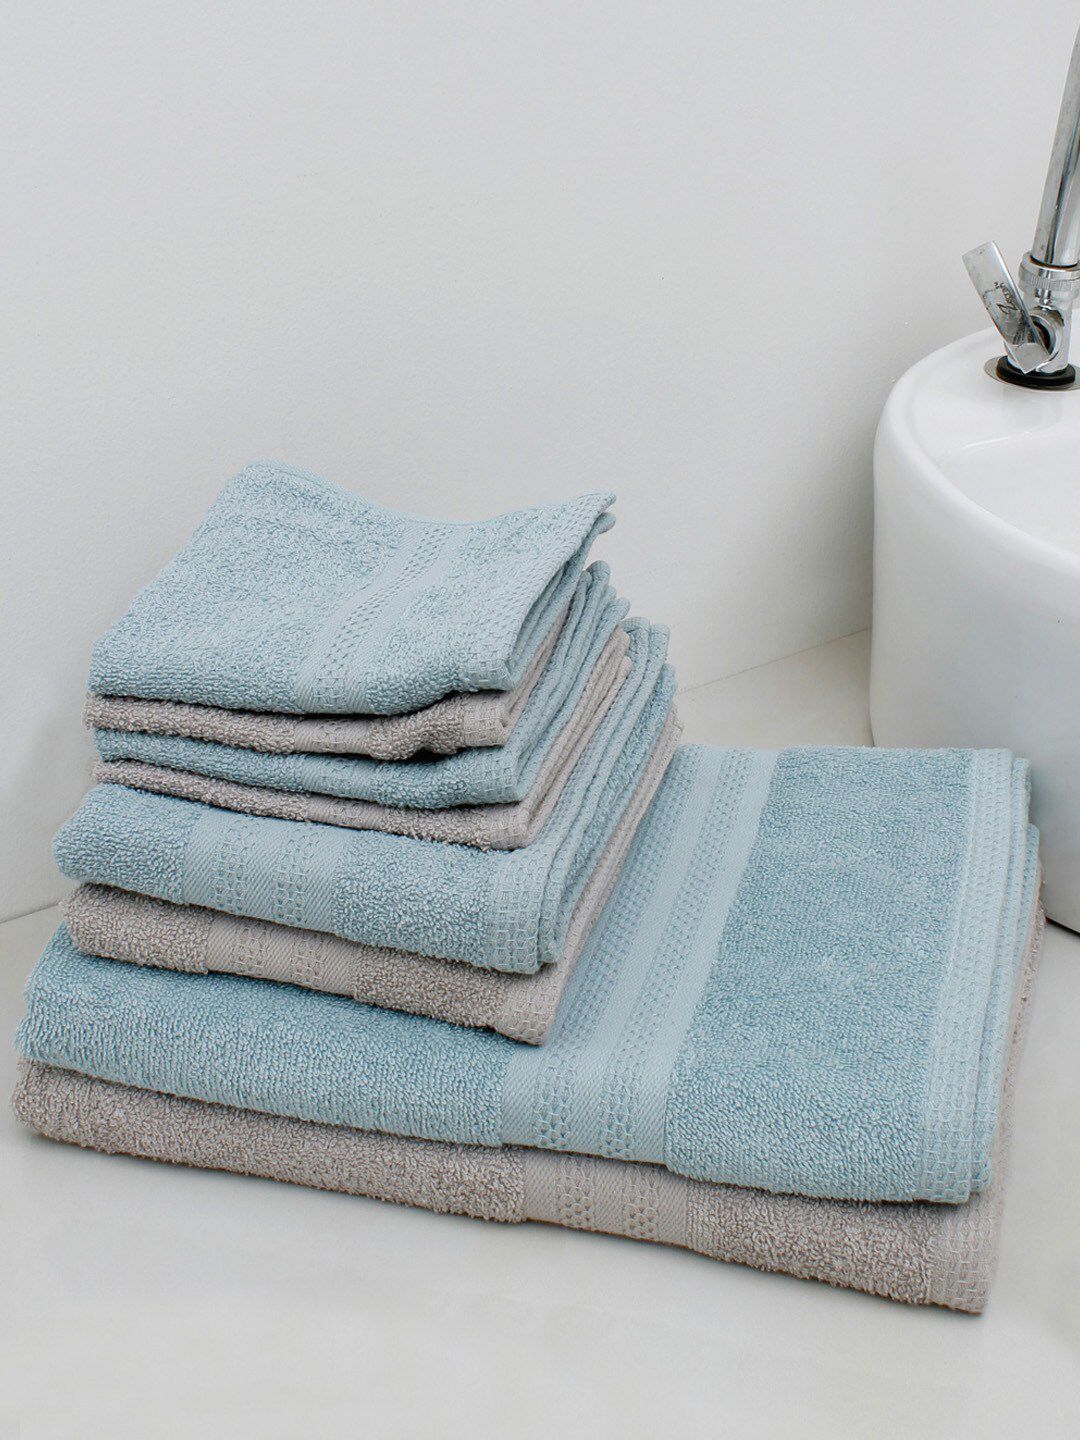 AVI Living Set of 8 Anti Microbial Cotton Towel GSM 400 Grey & Blue Towel Set Price in India